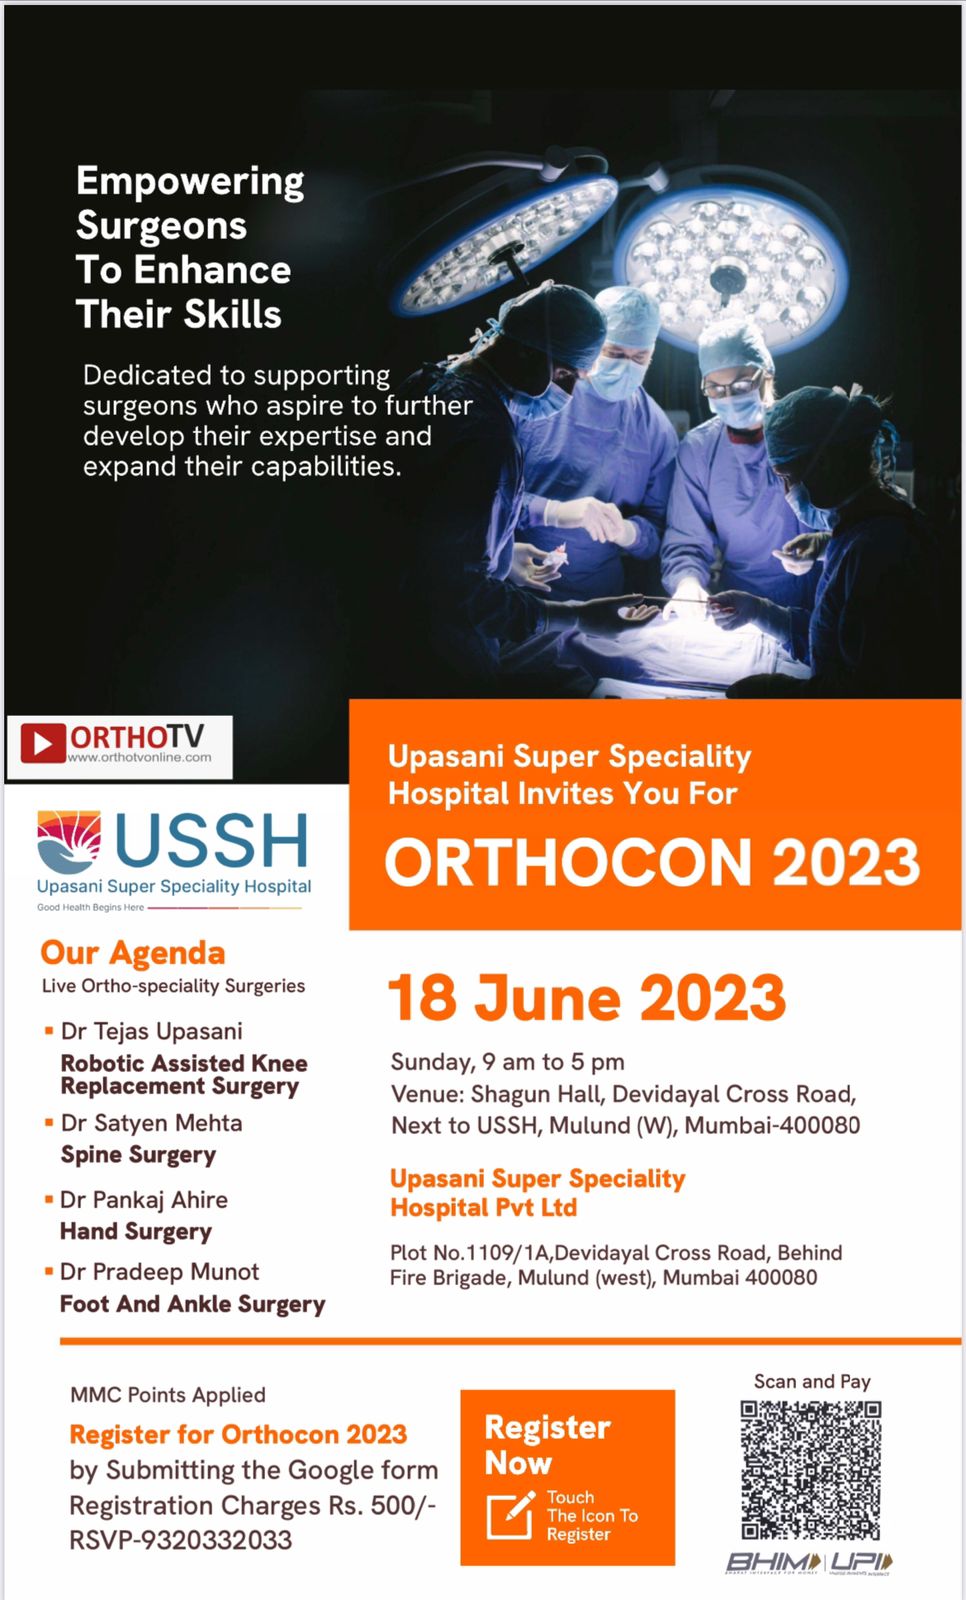 ORTHOCON 2023 : Live Ortho-speciality Surgeries